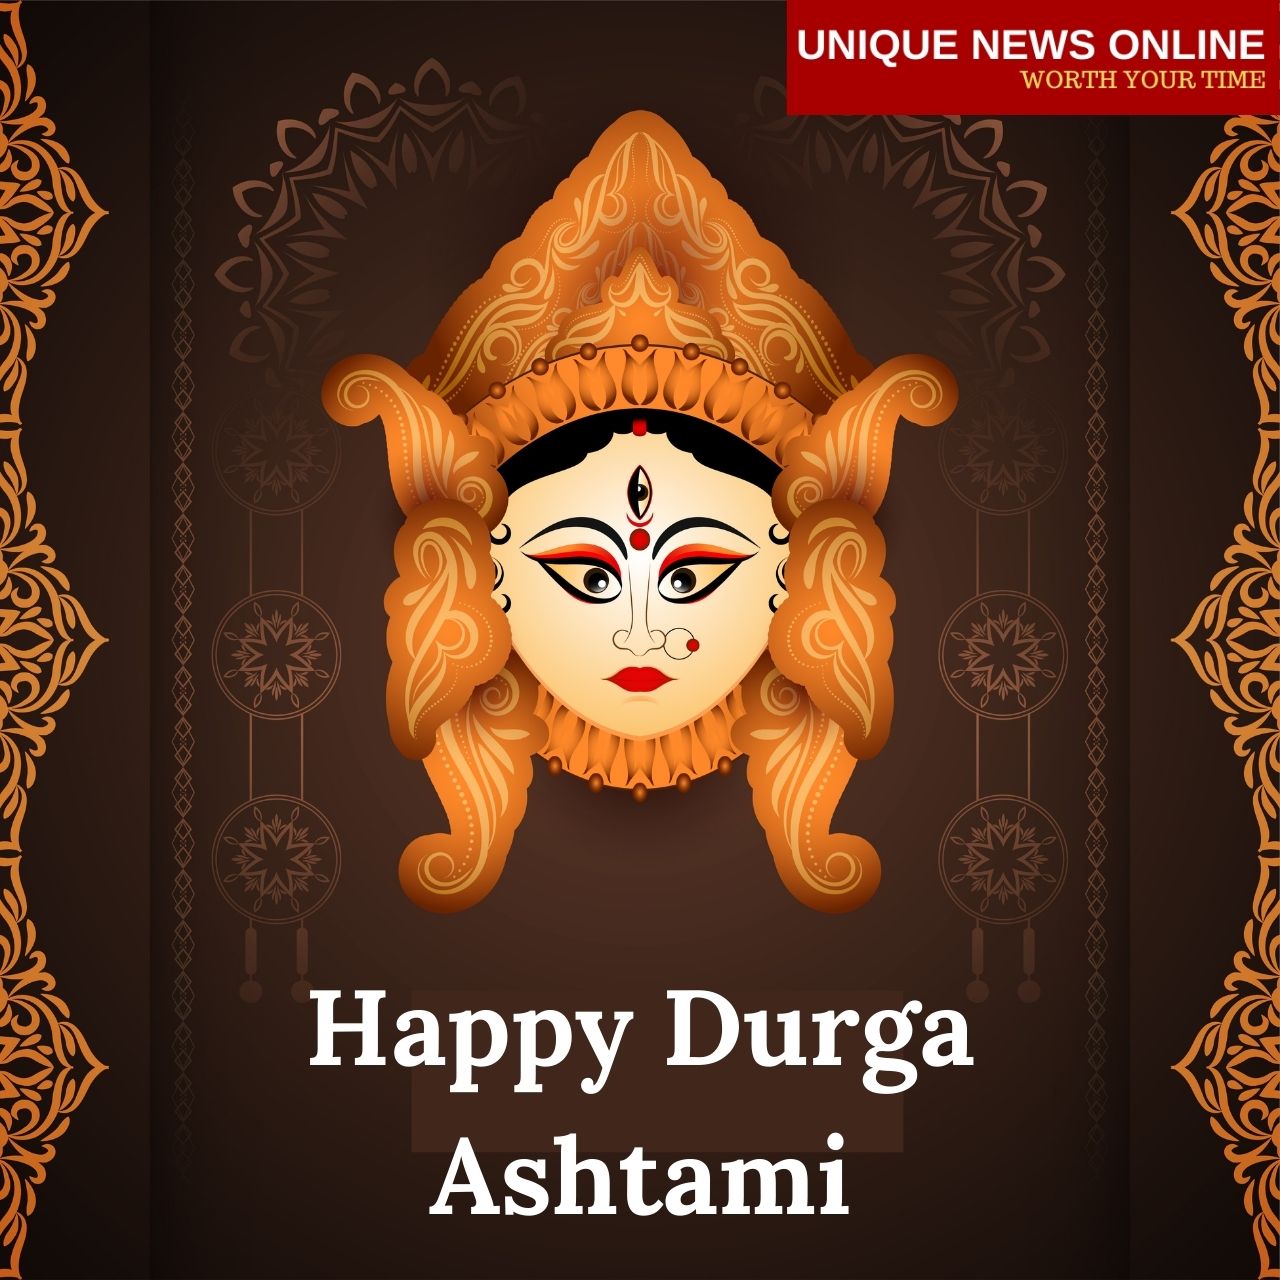 Happy Durga Ashtami 2021 Wishes, Messages, Greetings, Quotes, and Images